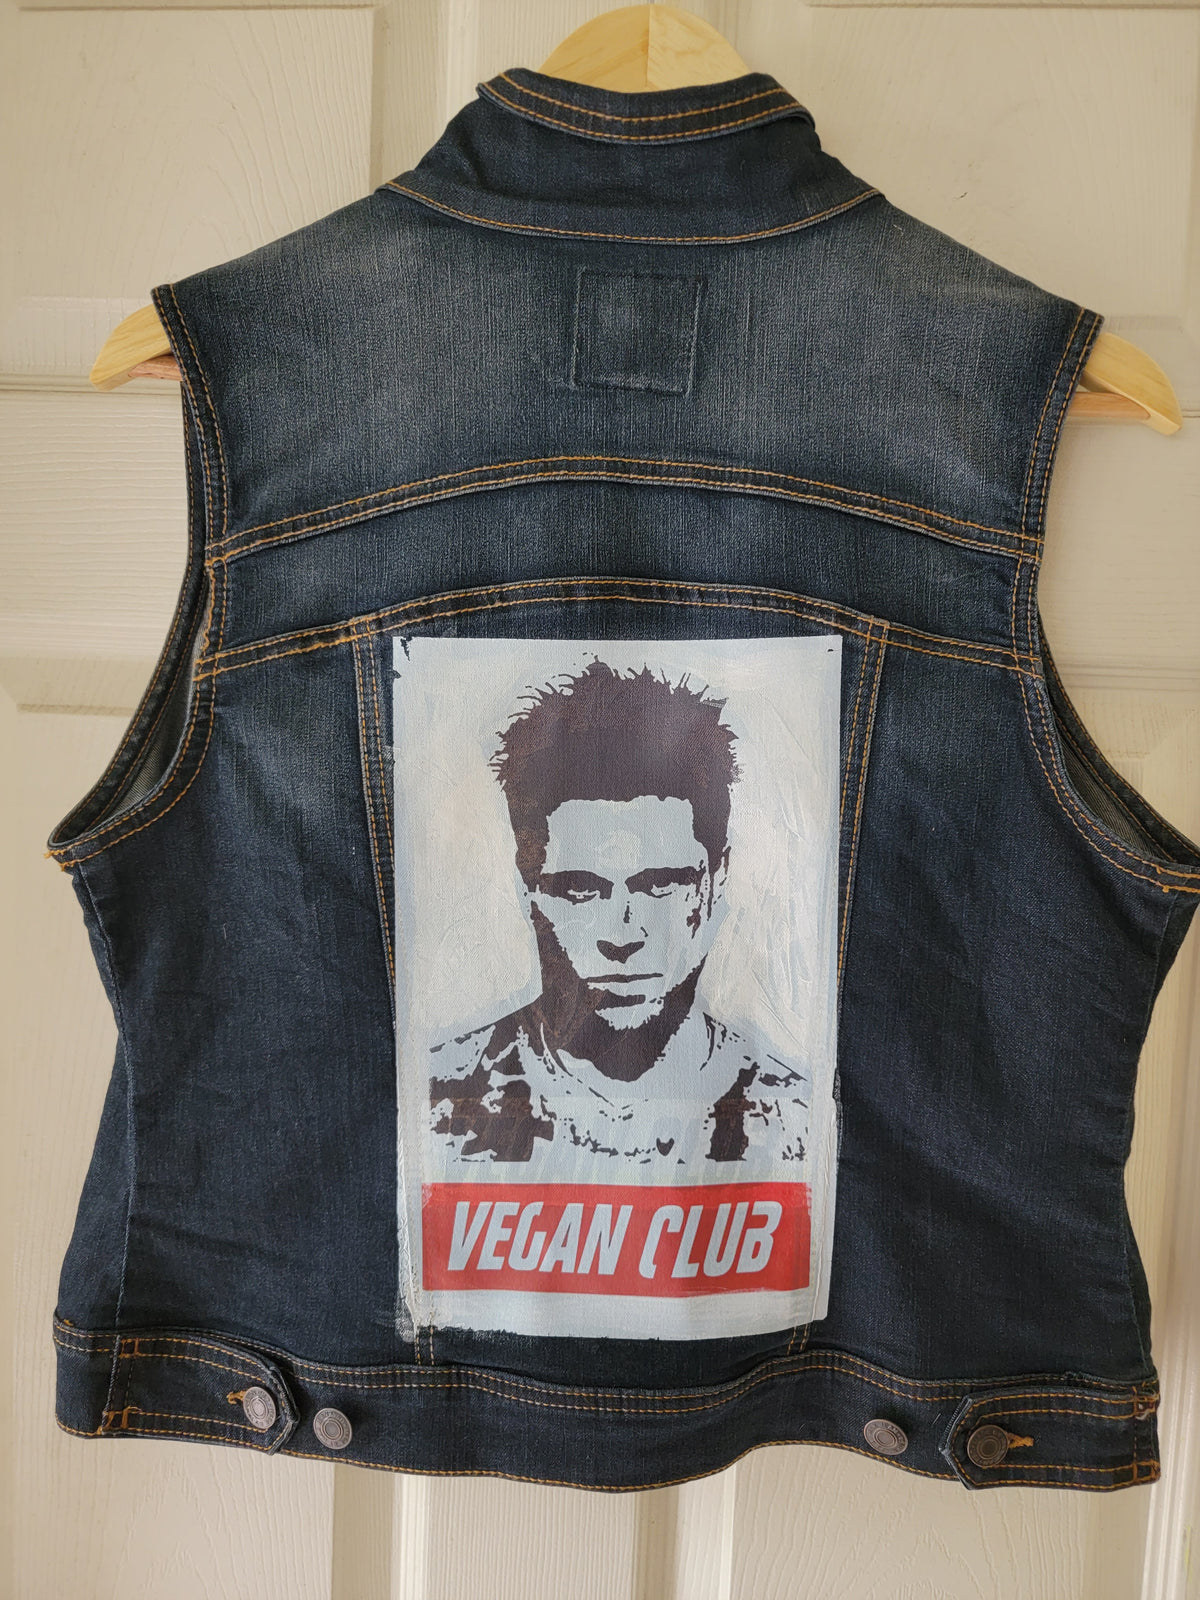 SOLD OUT - One of a Kind Upcycled Club No Sleeve Jean Jacket feat Brad Pitt in color